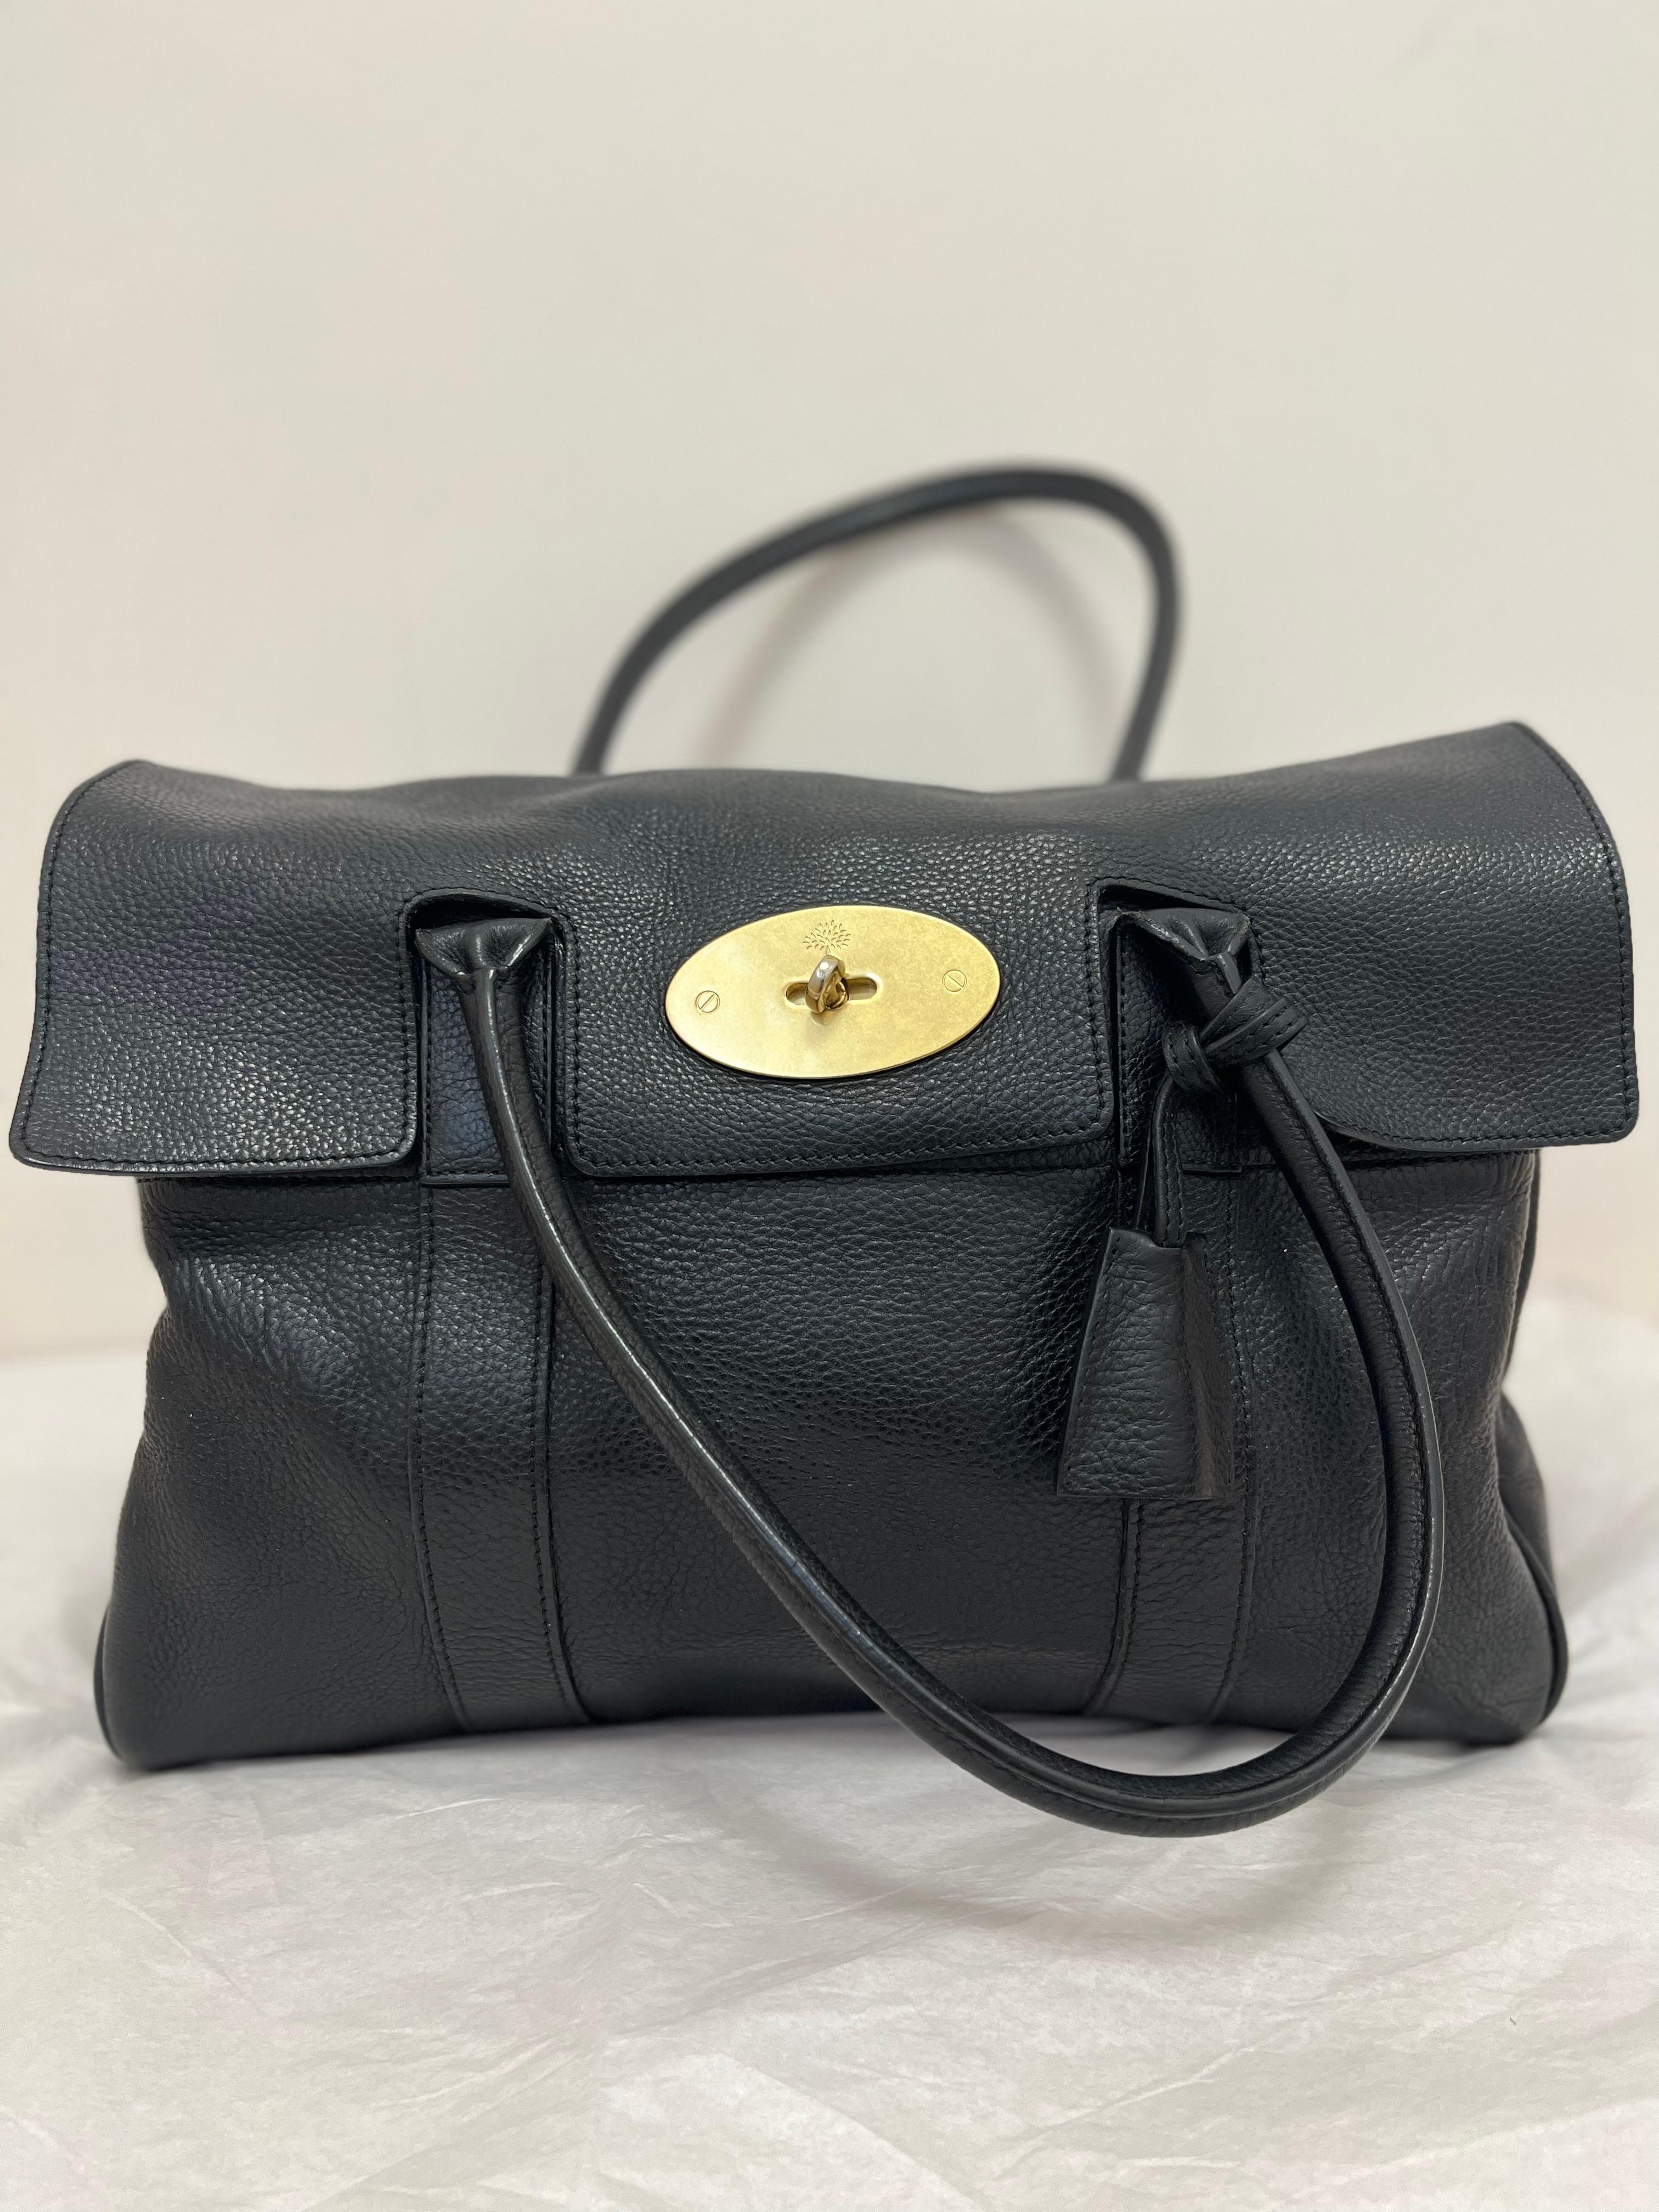 Made in England and in beautiful condition, this Mulberry Classic is made of grained leather. It has fold over flap with a turn lock closure; suede lining with internal logo pouch and slip pockets; brass hardware; interior belted sides which can be